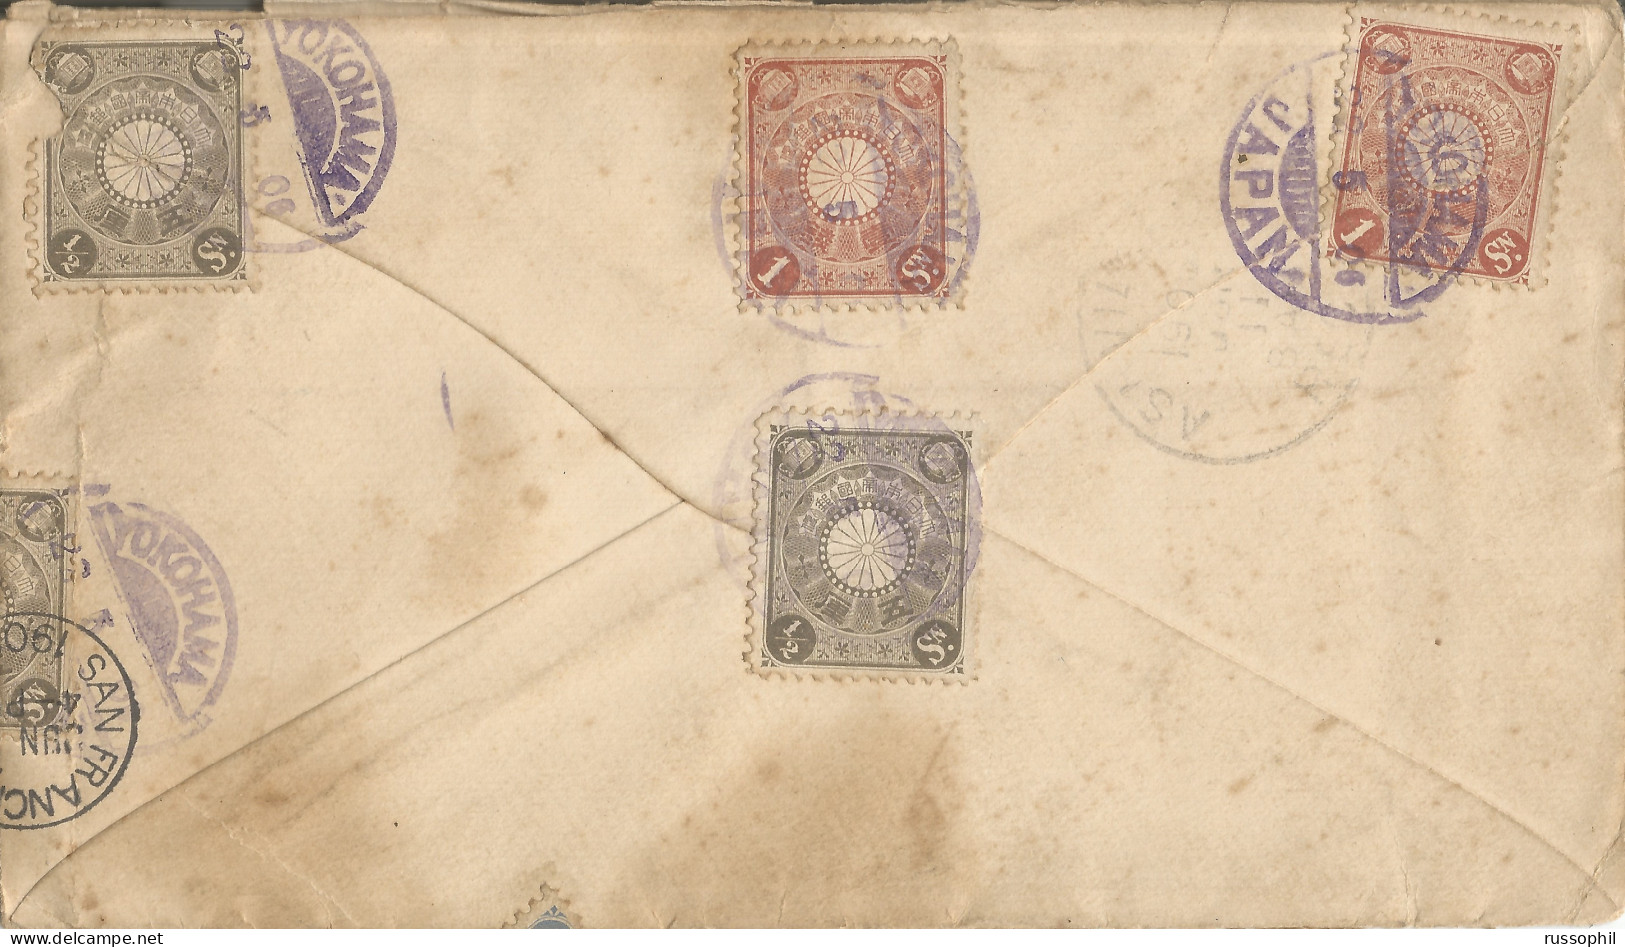 JAPAN - SPECTACULAR 20 SEN 21 STAMP FOUR COLOUR FRANKING ON COVER FROM YOKOHAMA TO THE US - 1906 - Storia Postale